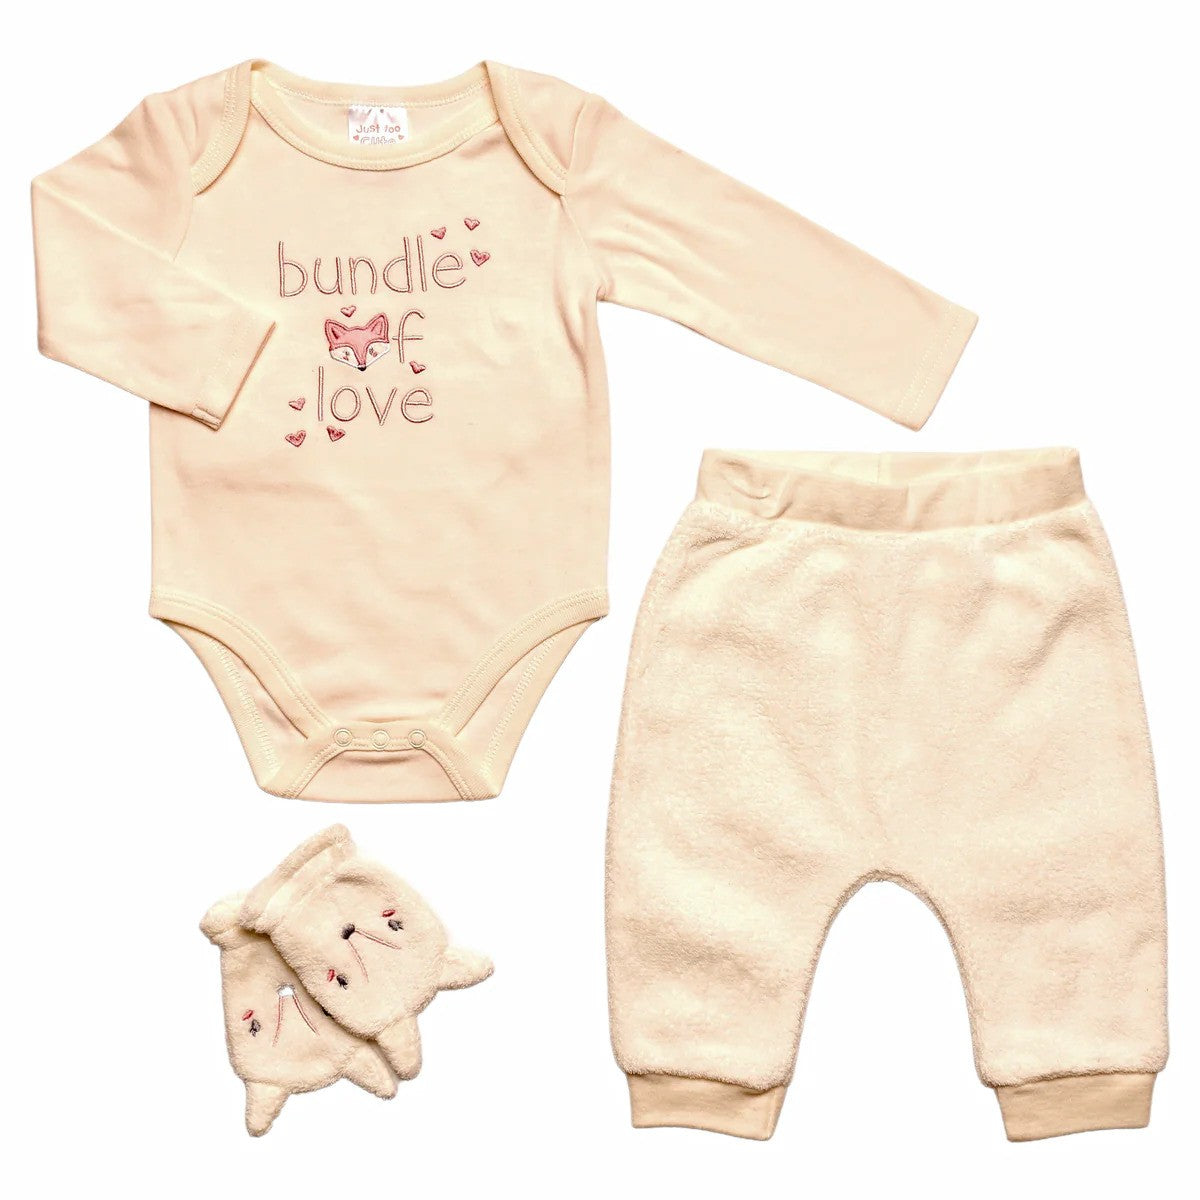 Cream baby clothing set with pink fox embroidery and wording that reads &#39;bundle of love&#39;. Includes a bodysuit, trousers, and mittens